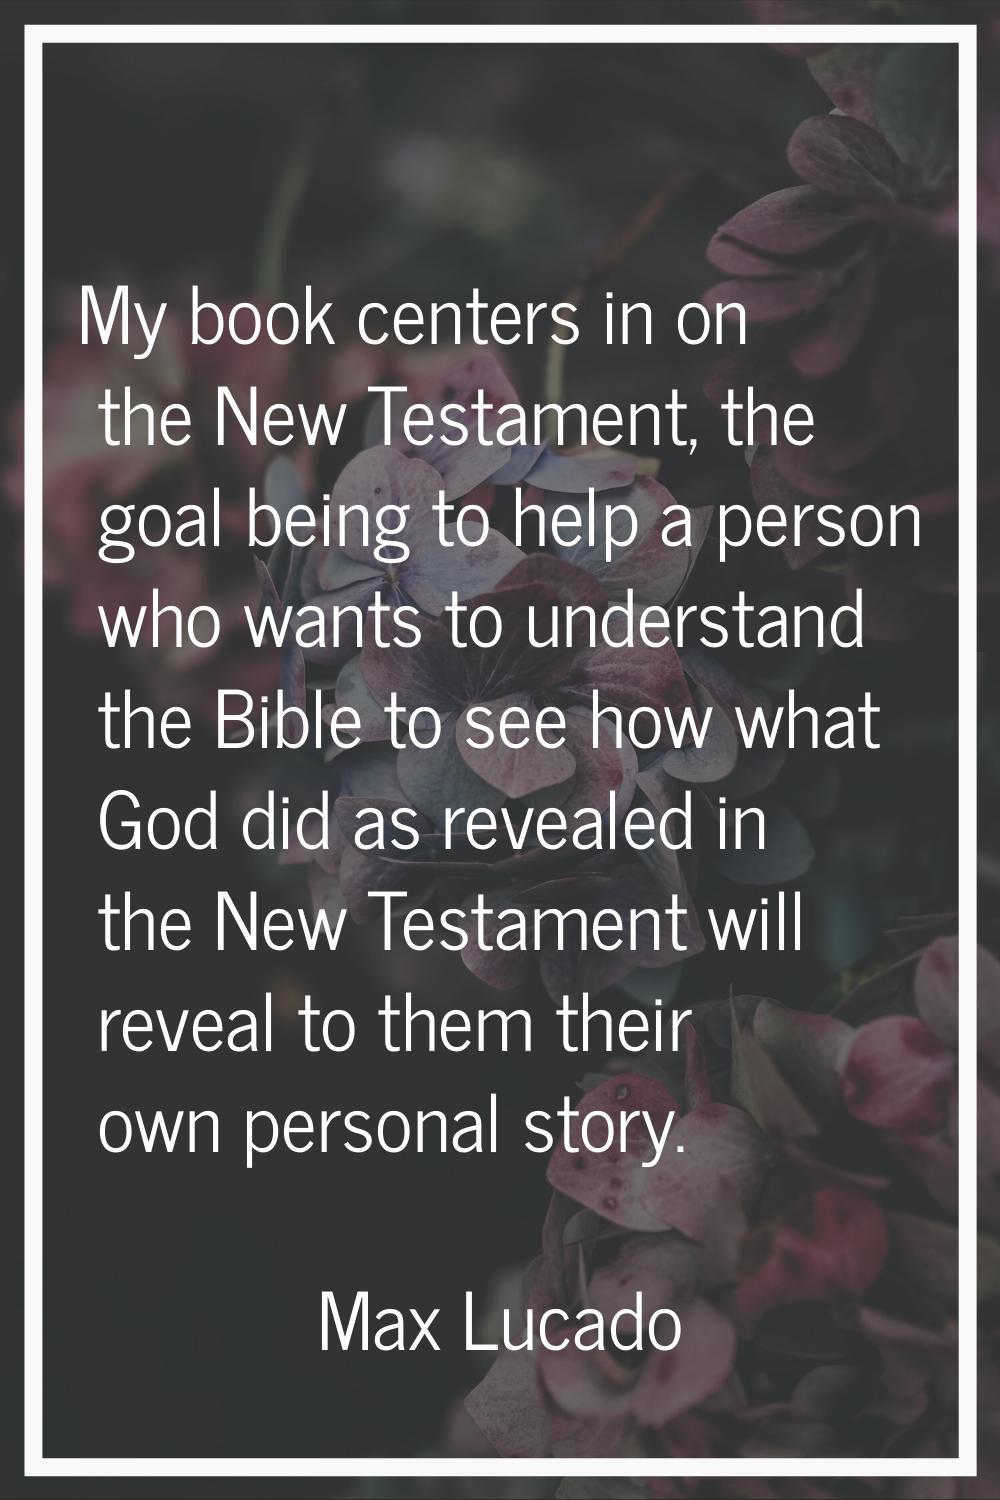 My book centers in on the New Testament, the goal being to help a person who wants to understand th